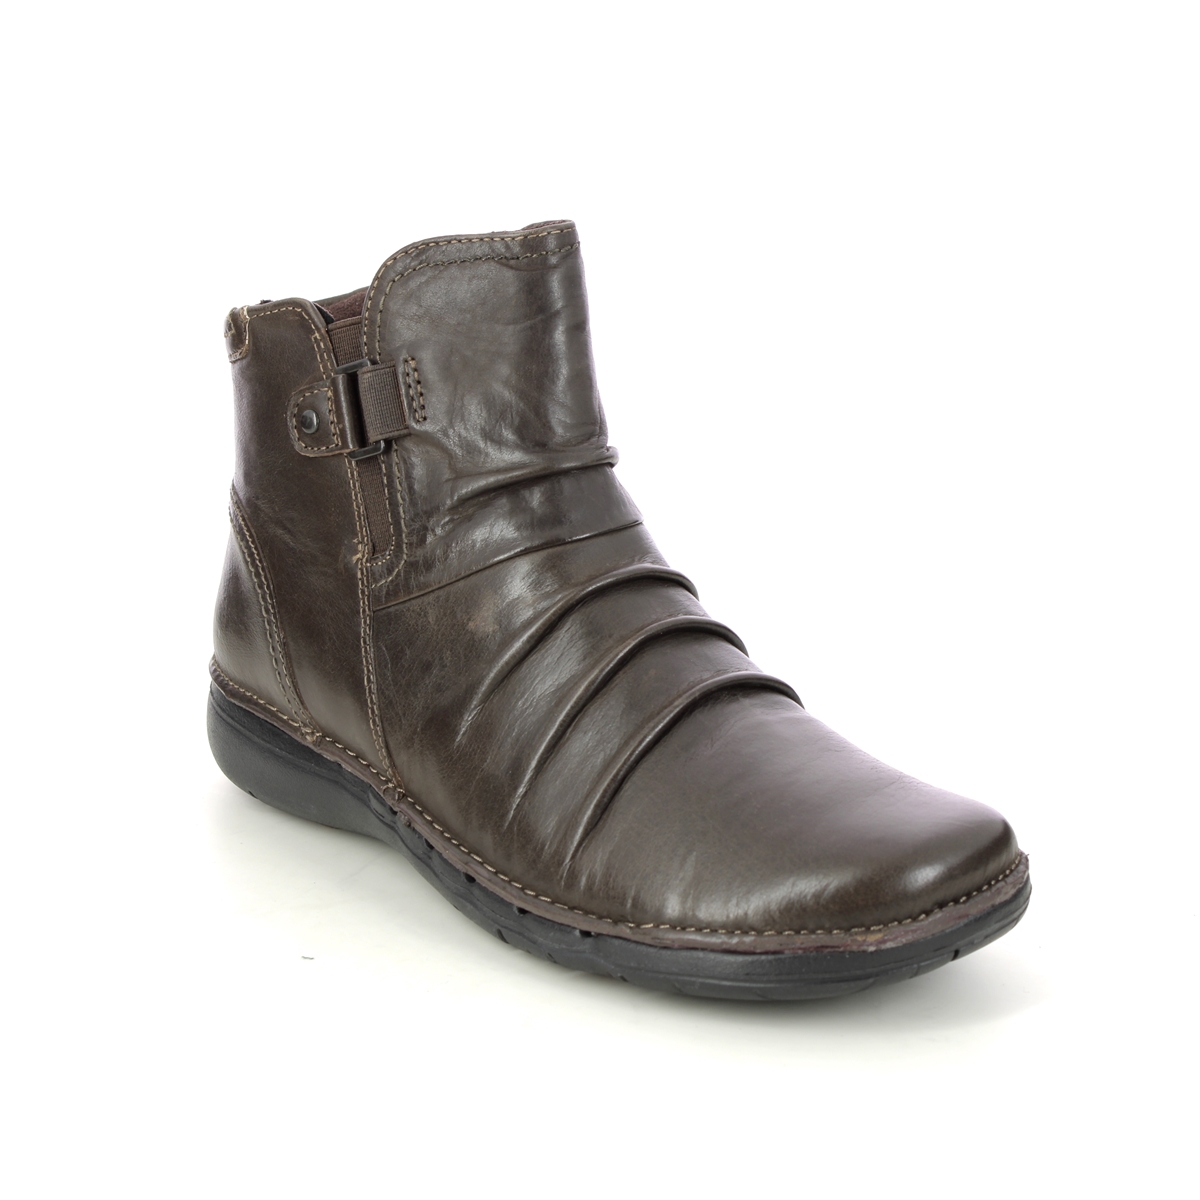 Clarks Un Loop Top Brown Leather Womens Ankle Boots 686624D In Size 7 In Plain Brown Leather